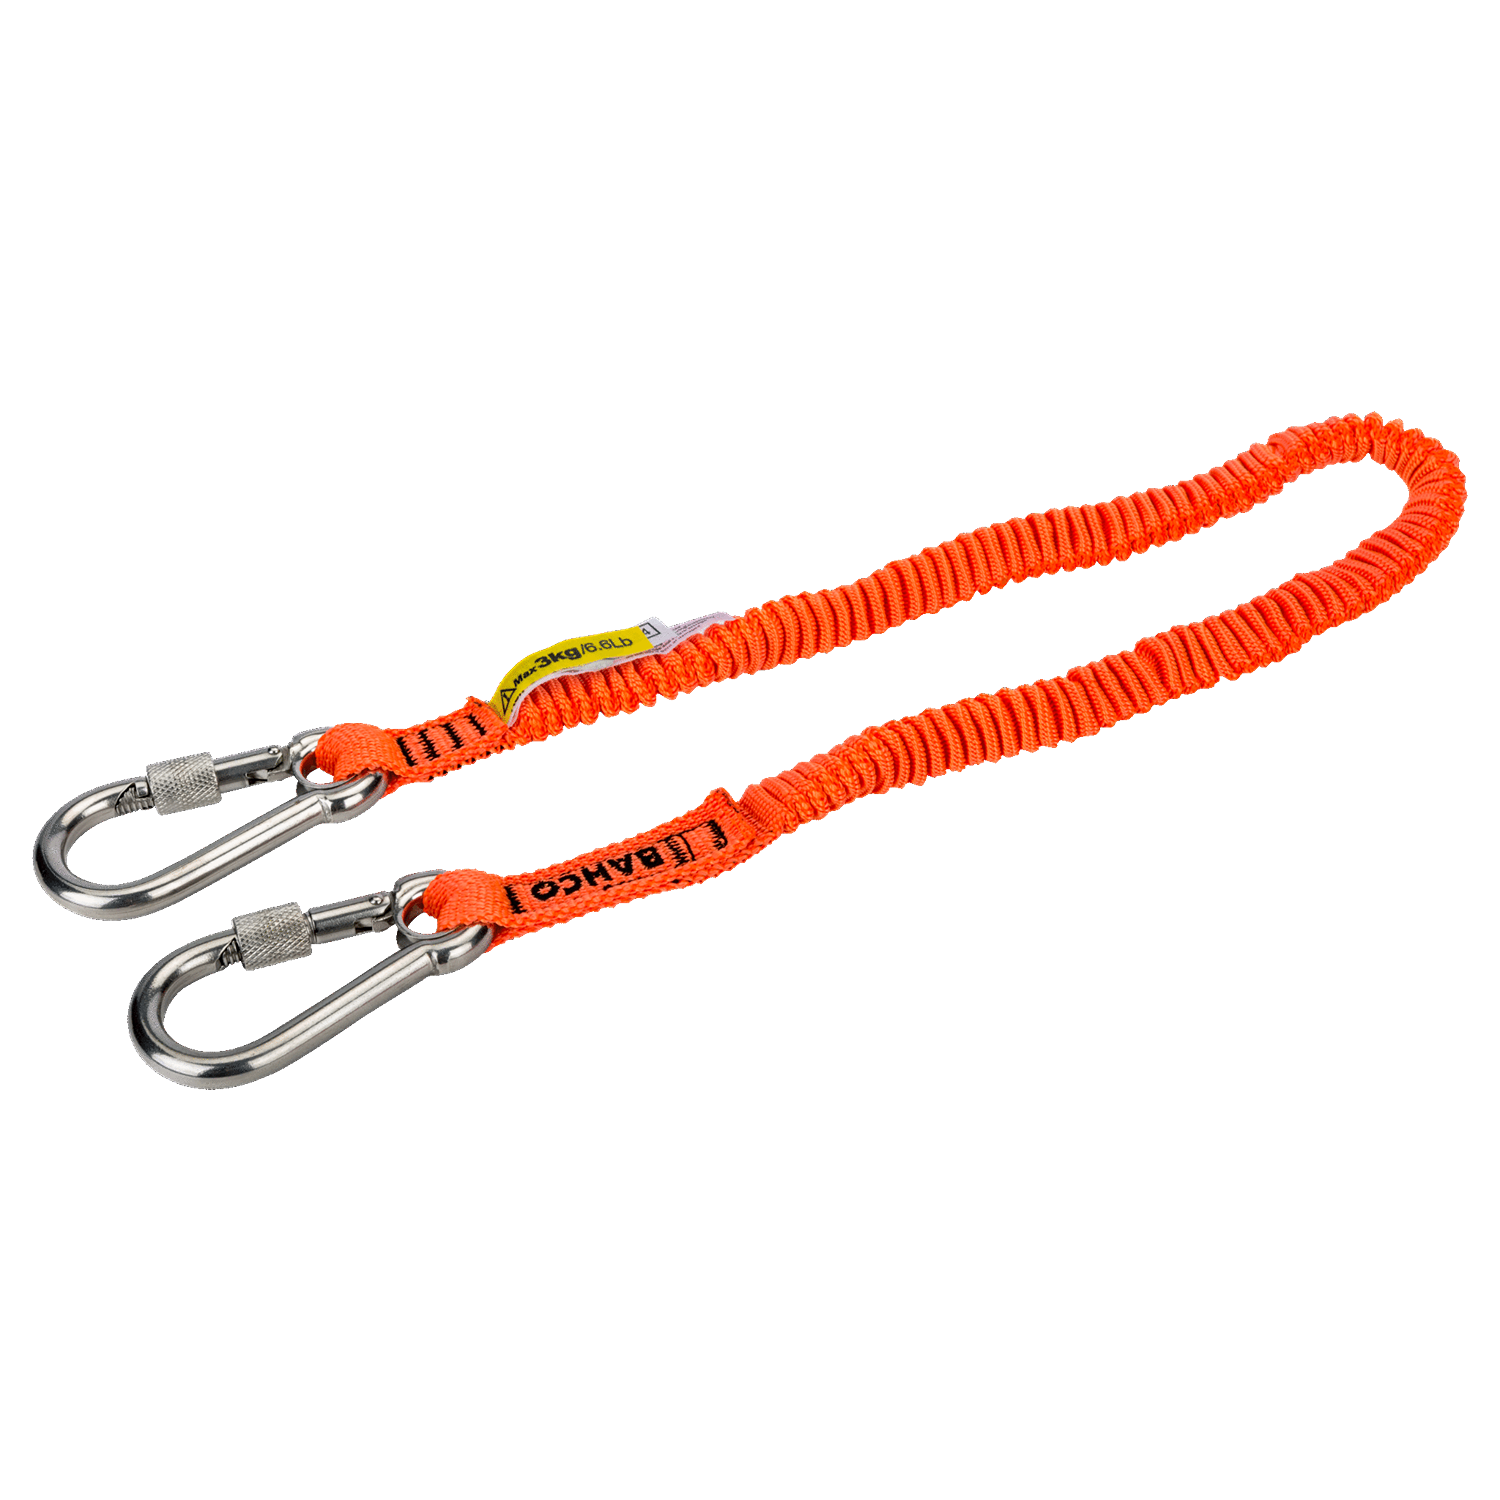 BAHCO 3875-LY7 Strap Lanyard with Fixed Carabiner 3 kg - Premium Lanyard from BAHCO - Shop now at Yew Aik.